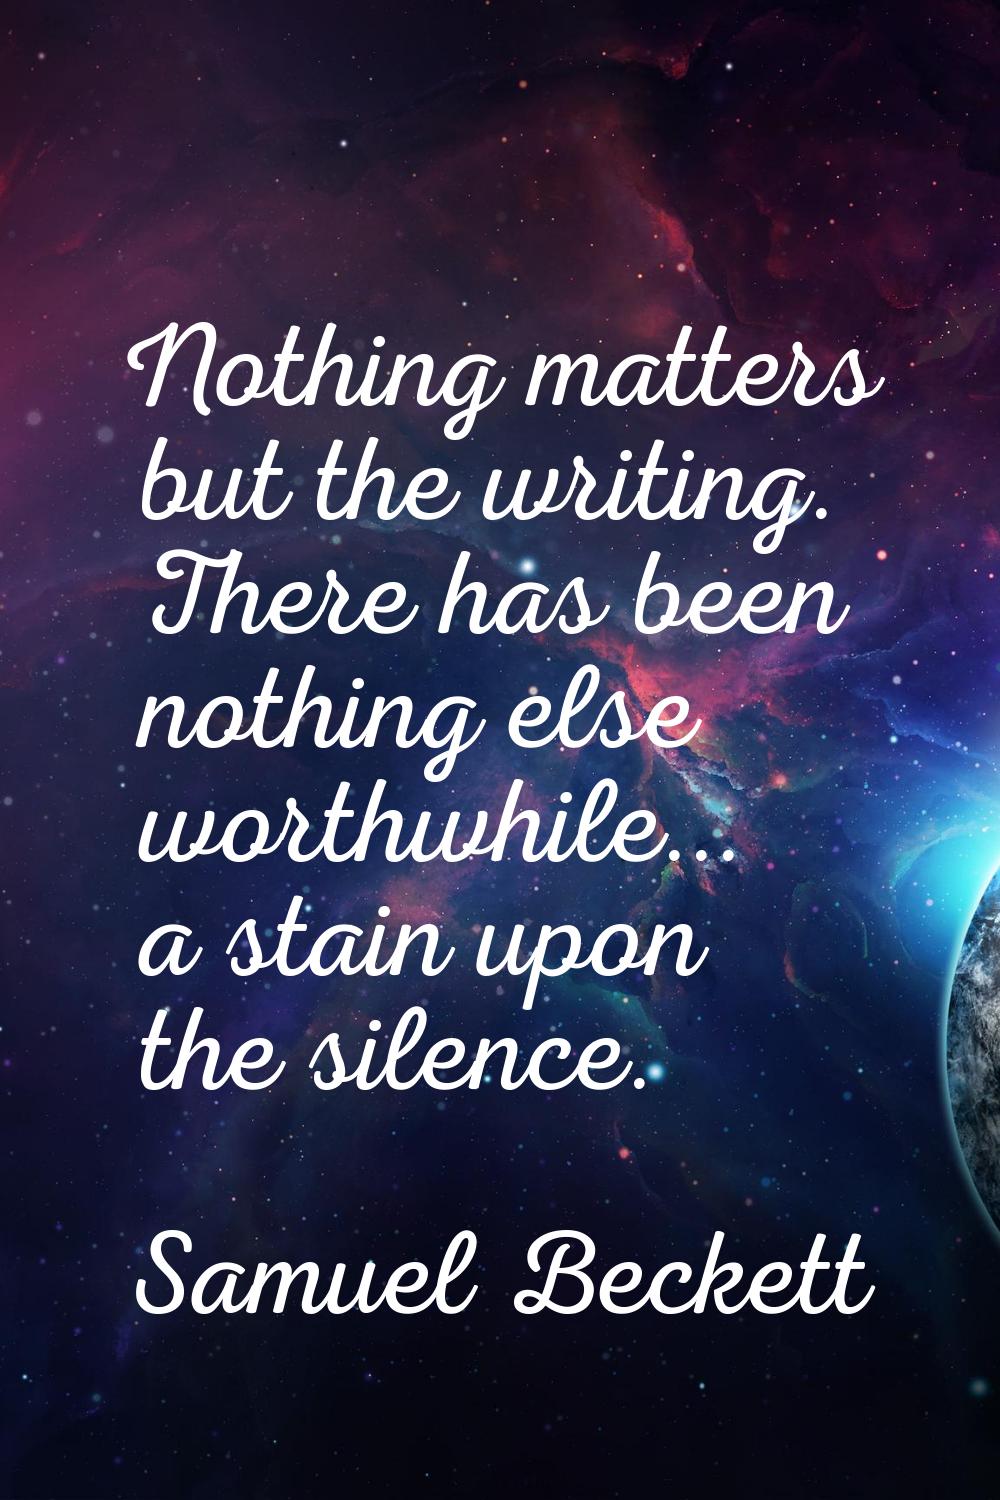 Nothing matters but the writing. There has been nothing else worthwhile... a stain upon the silence